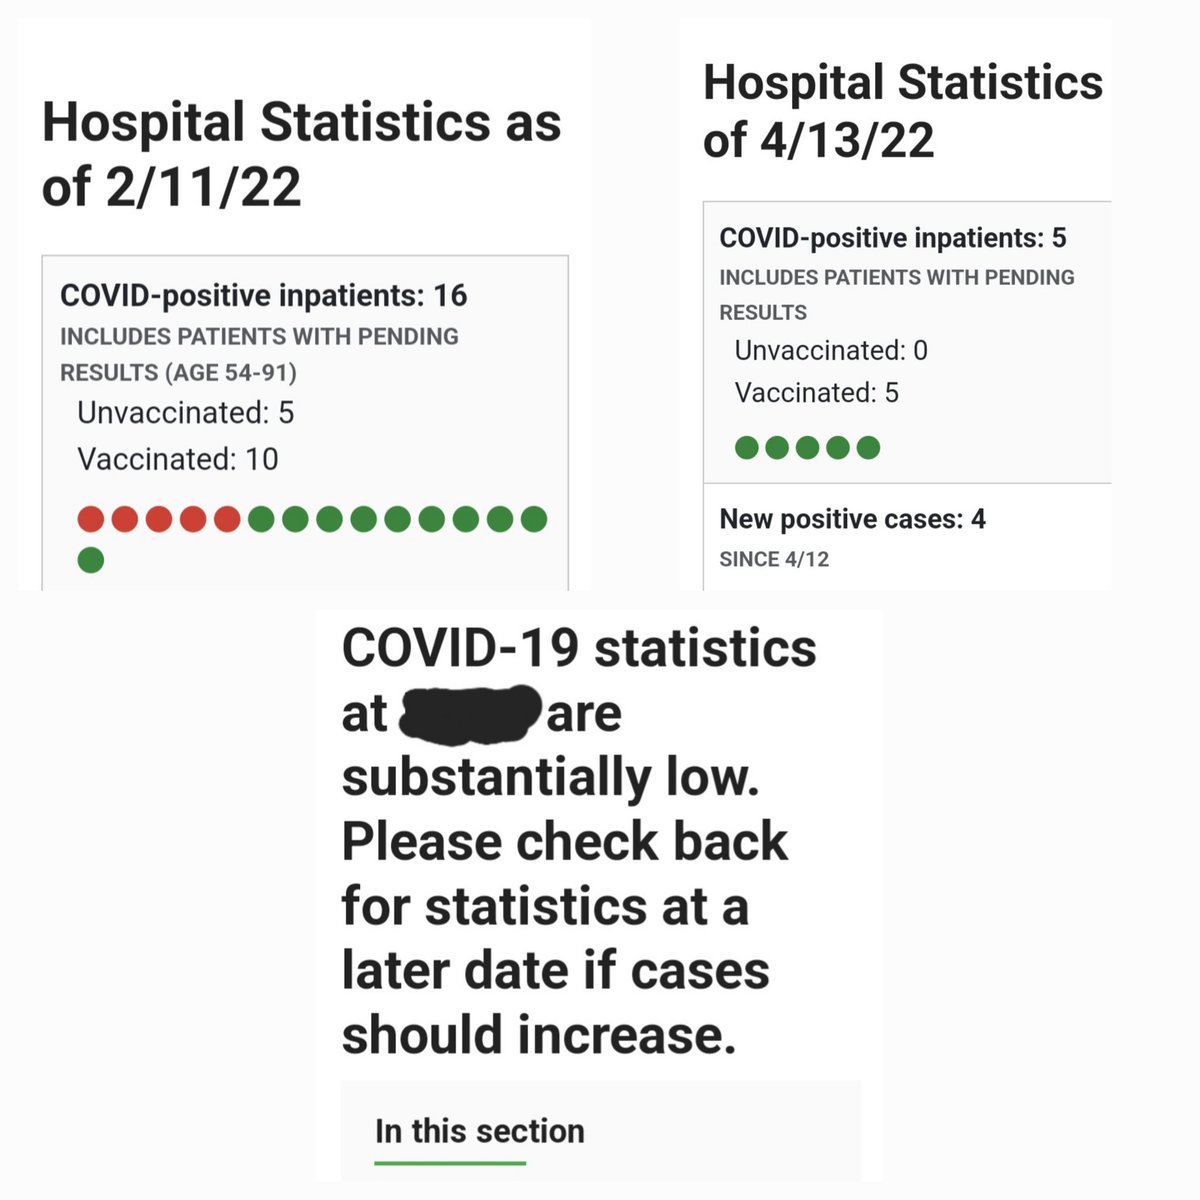 I remember when the death trackers disappeared when Biden was installed.
I also remember when my local hospital removed their public COVID tracking board once more vaccinated were admitted than unvaccinated. (Our county had less than 50% vaccination rate)